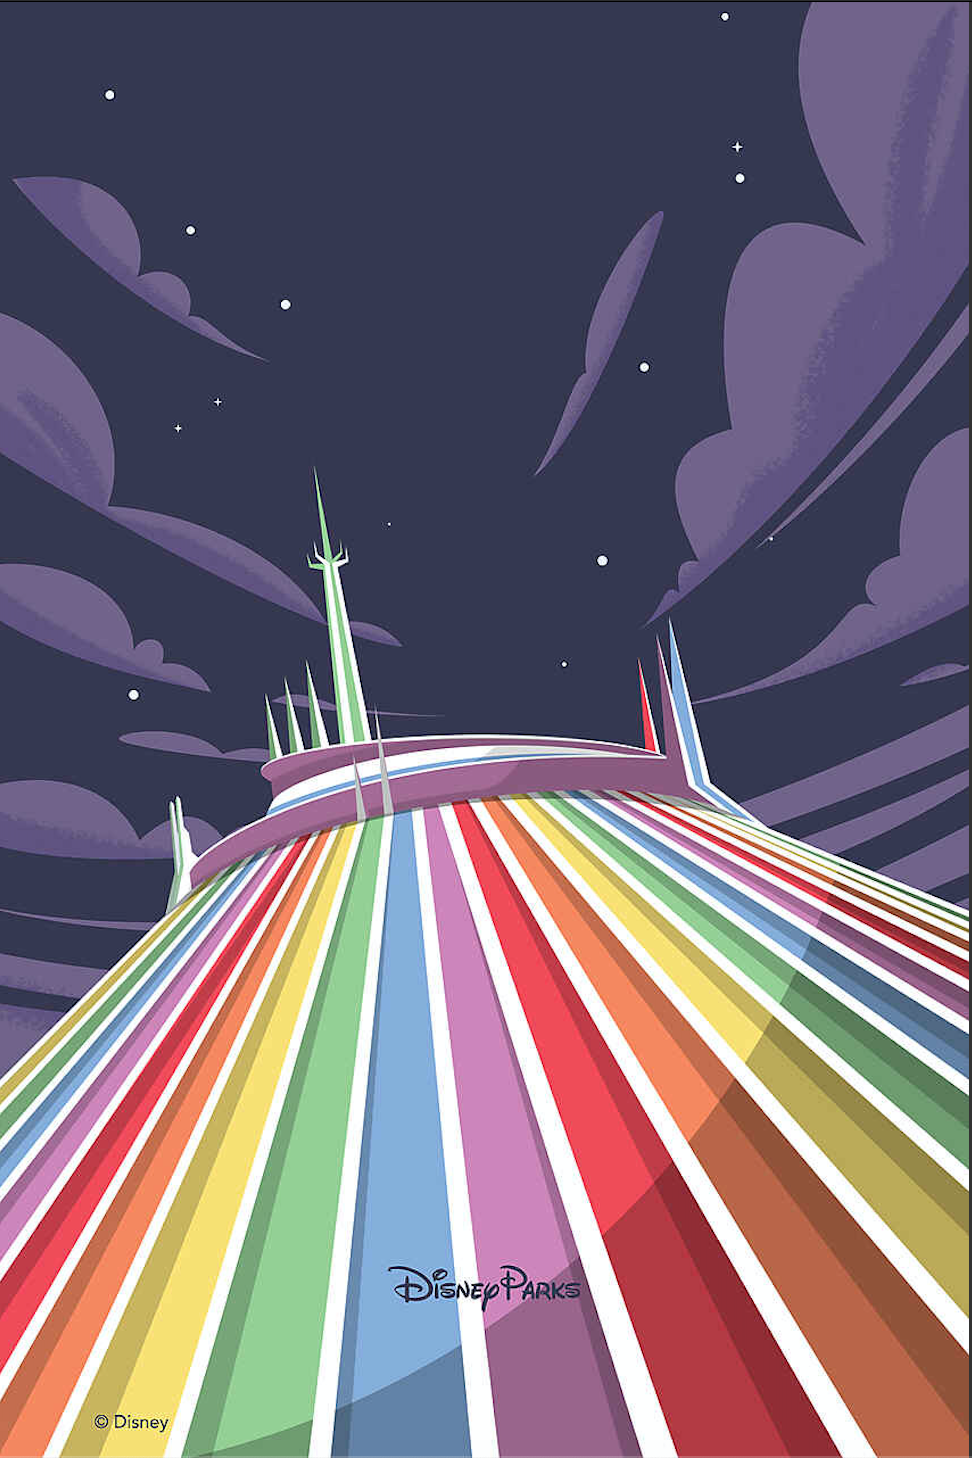  Disney Phone Wallpapers to Celebrate Pride Month the disney